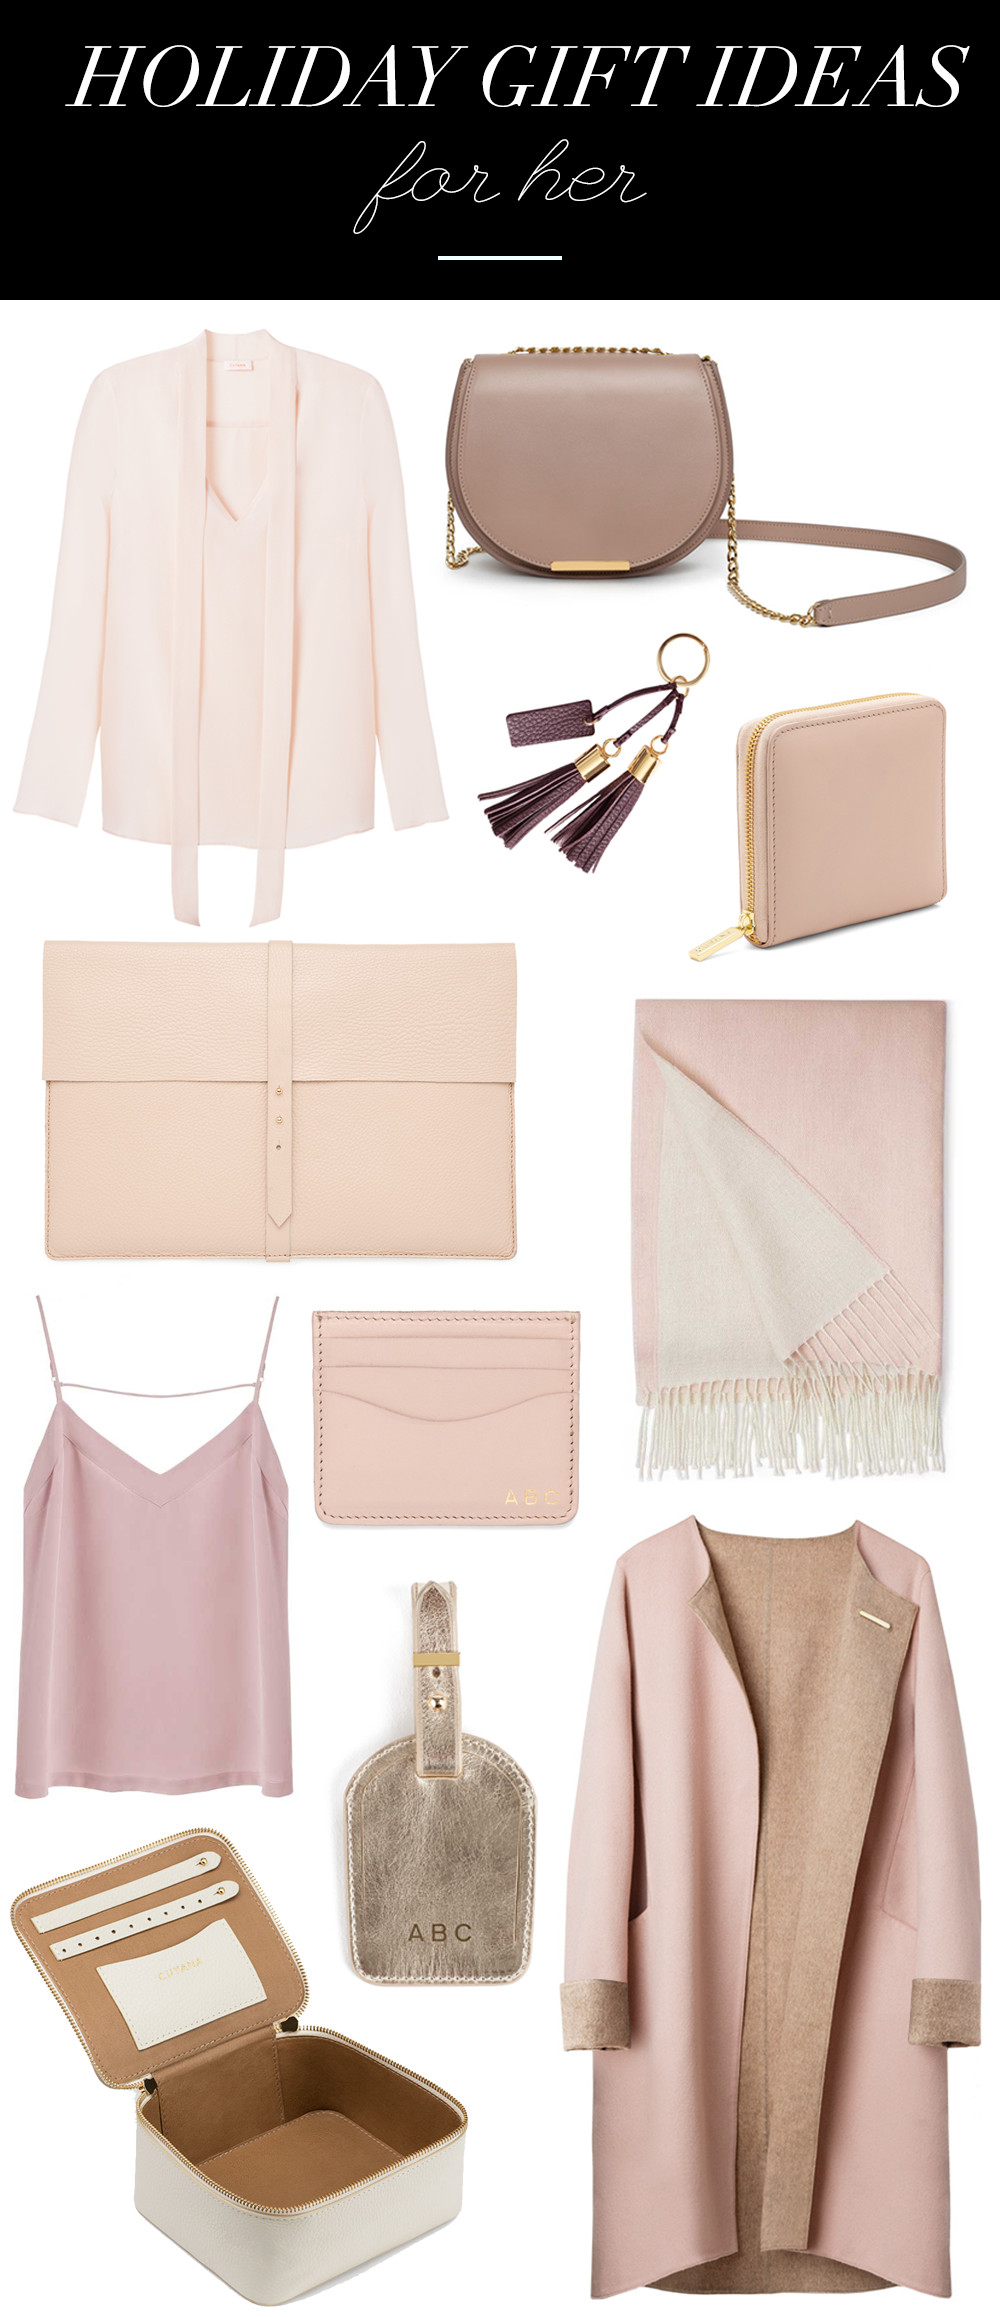 12 Days Of Christmas Gift Ideas For Her
 12 Days of Giving Cuyana Gift Guide